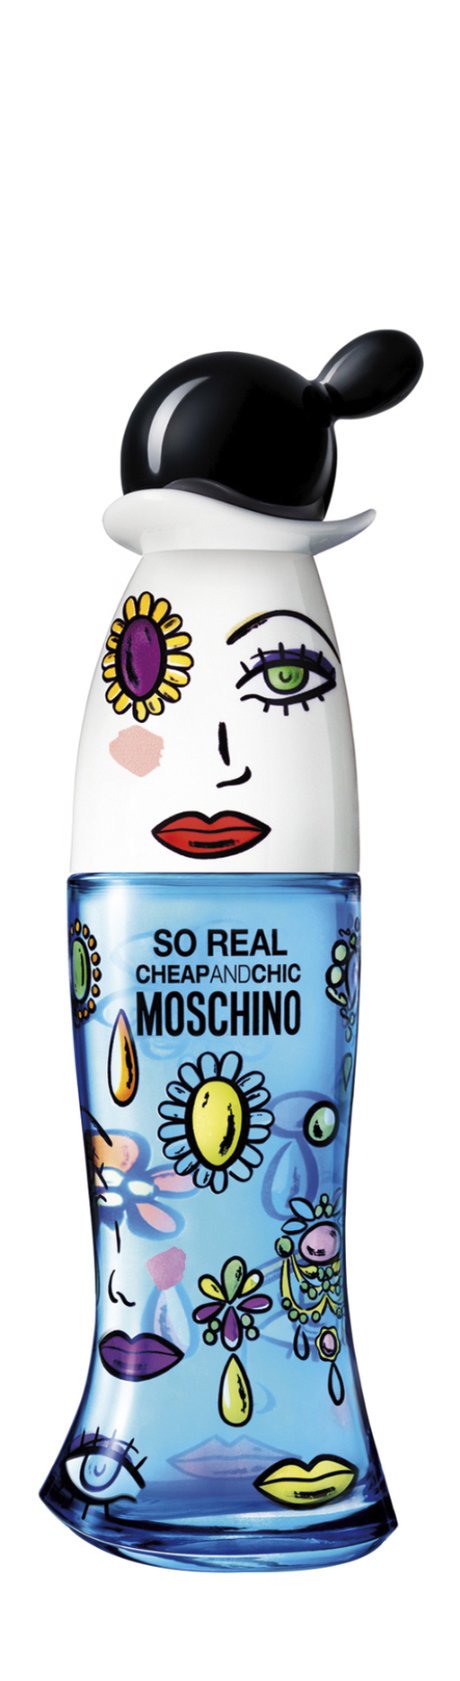 Moschino Cheap and Chic So Real Eau De Toilette